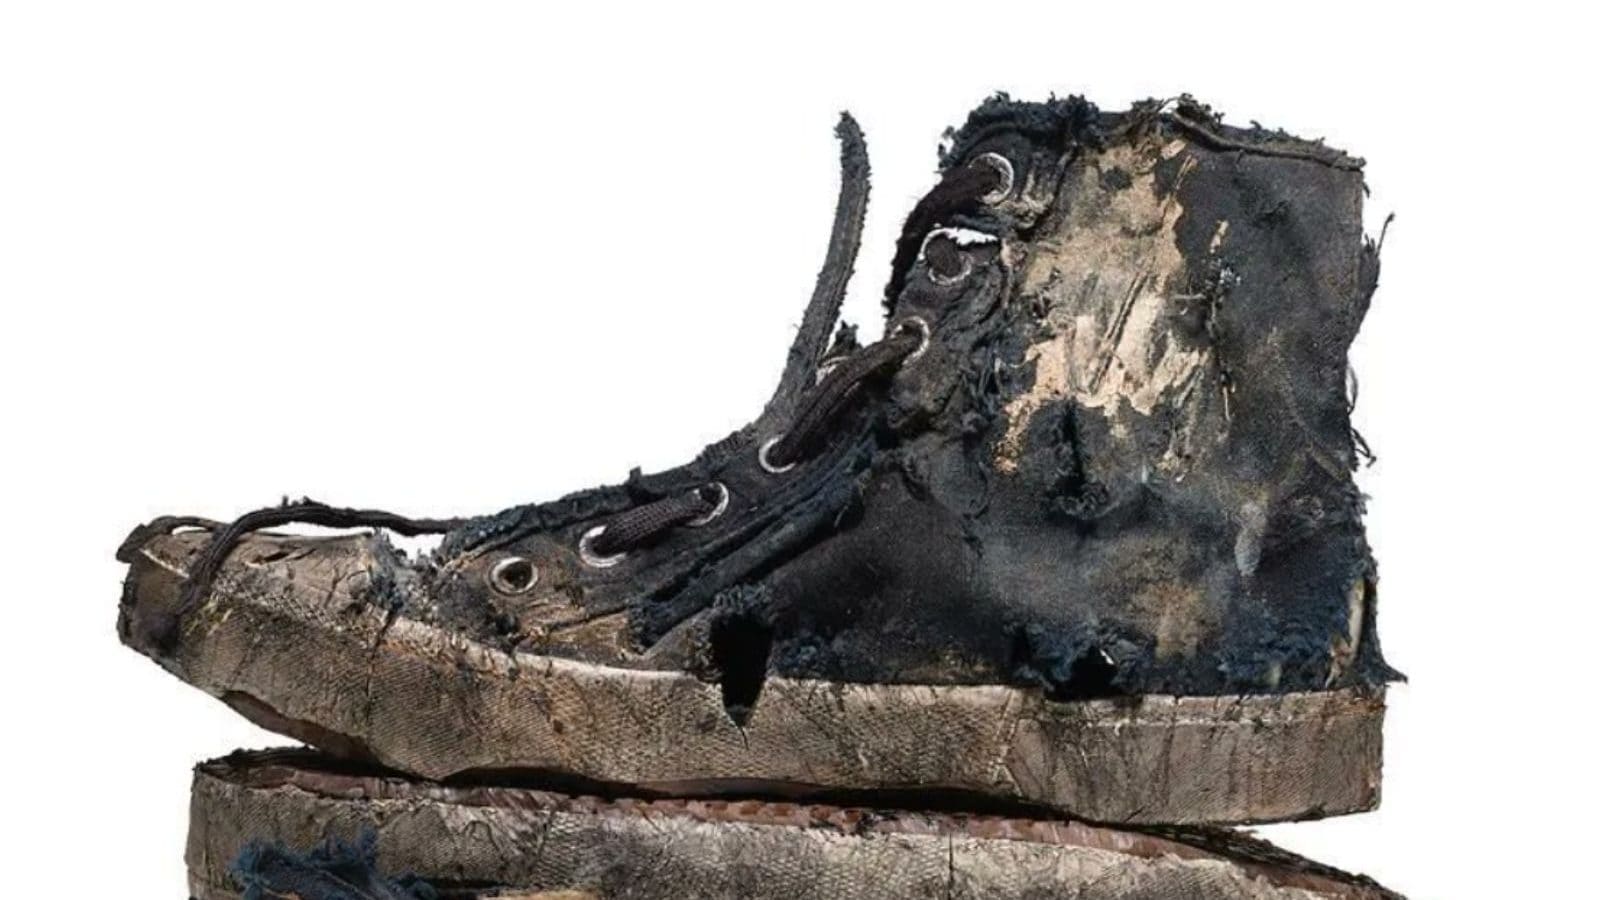 Balenciaga's Latest Offering: 'Fully-Destroyed' Sneakers For Rs 1.44 Lakh